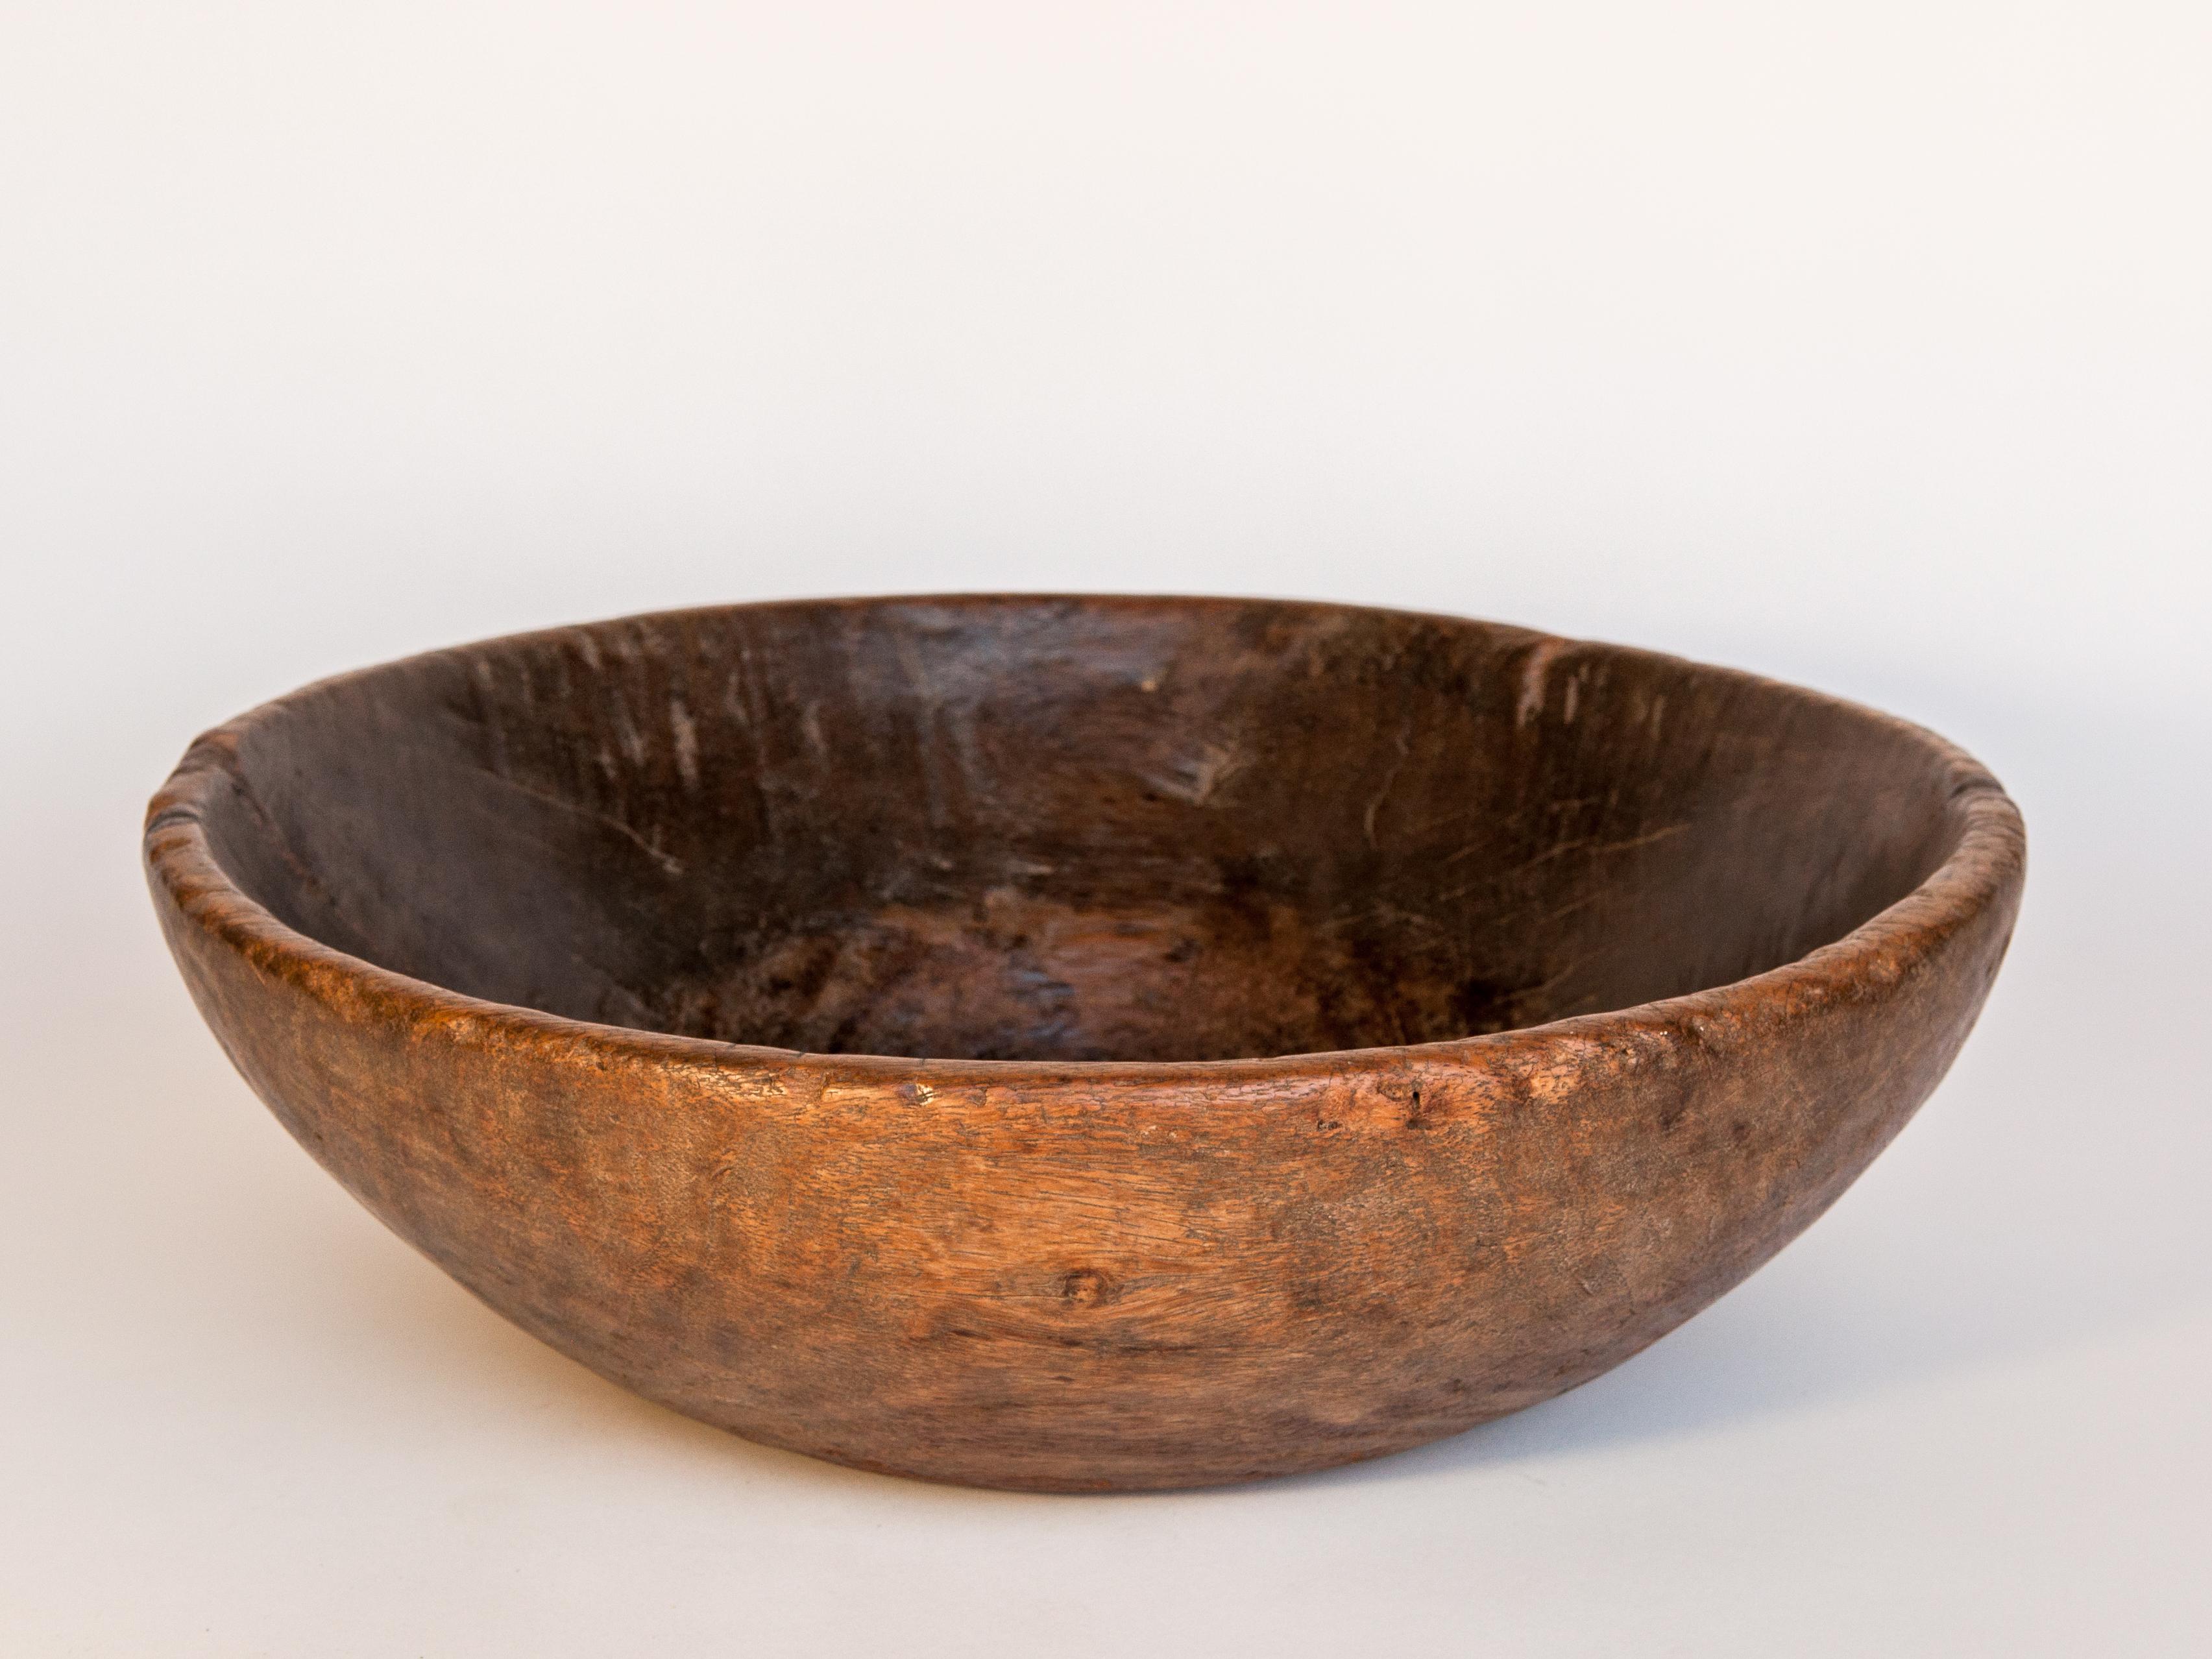 Old rustic wooden bowl from the Nepal Himal, 14